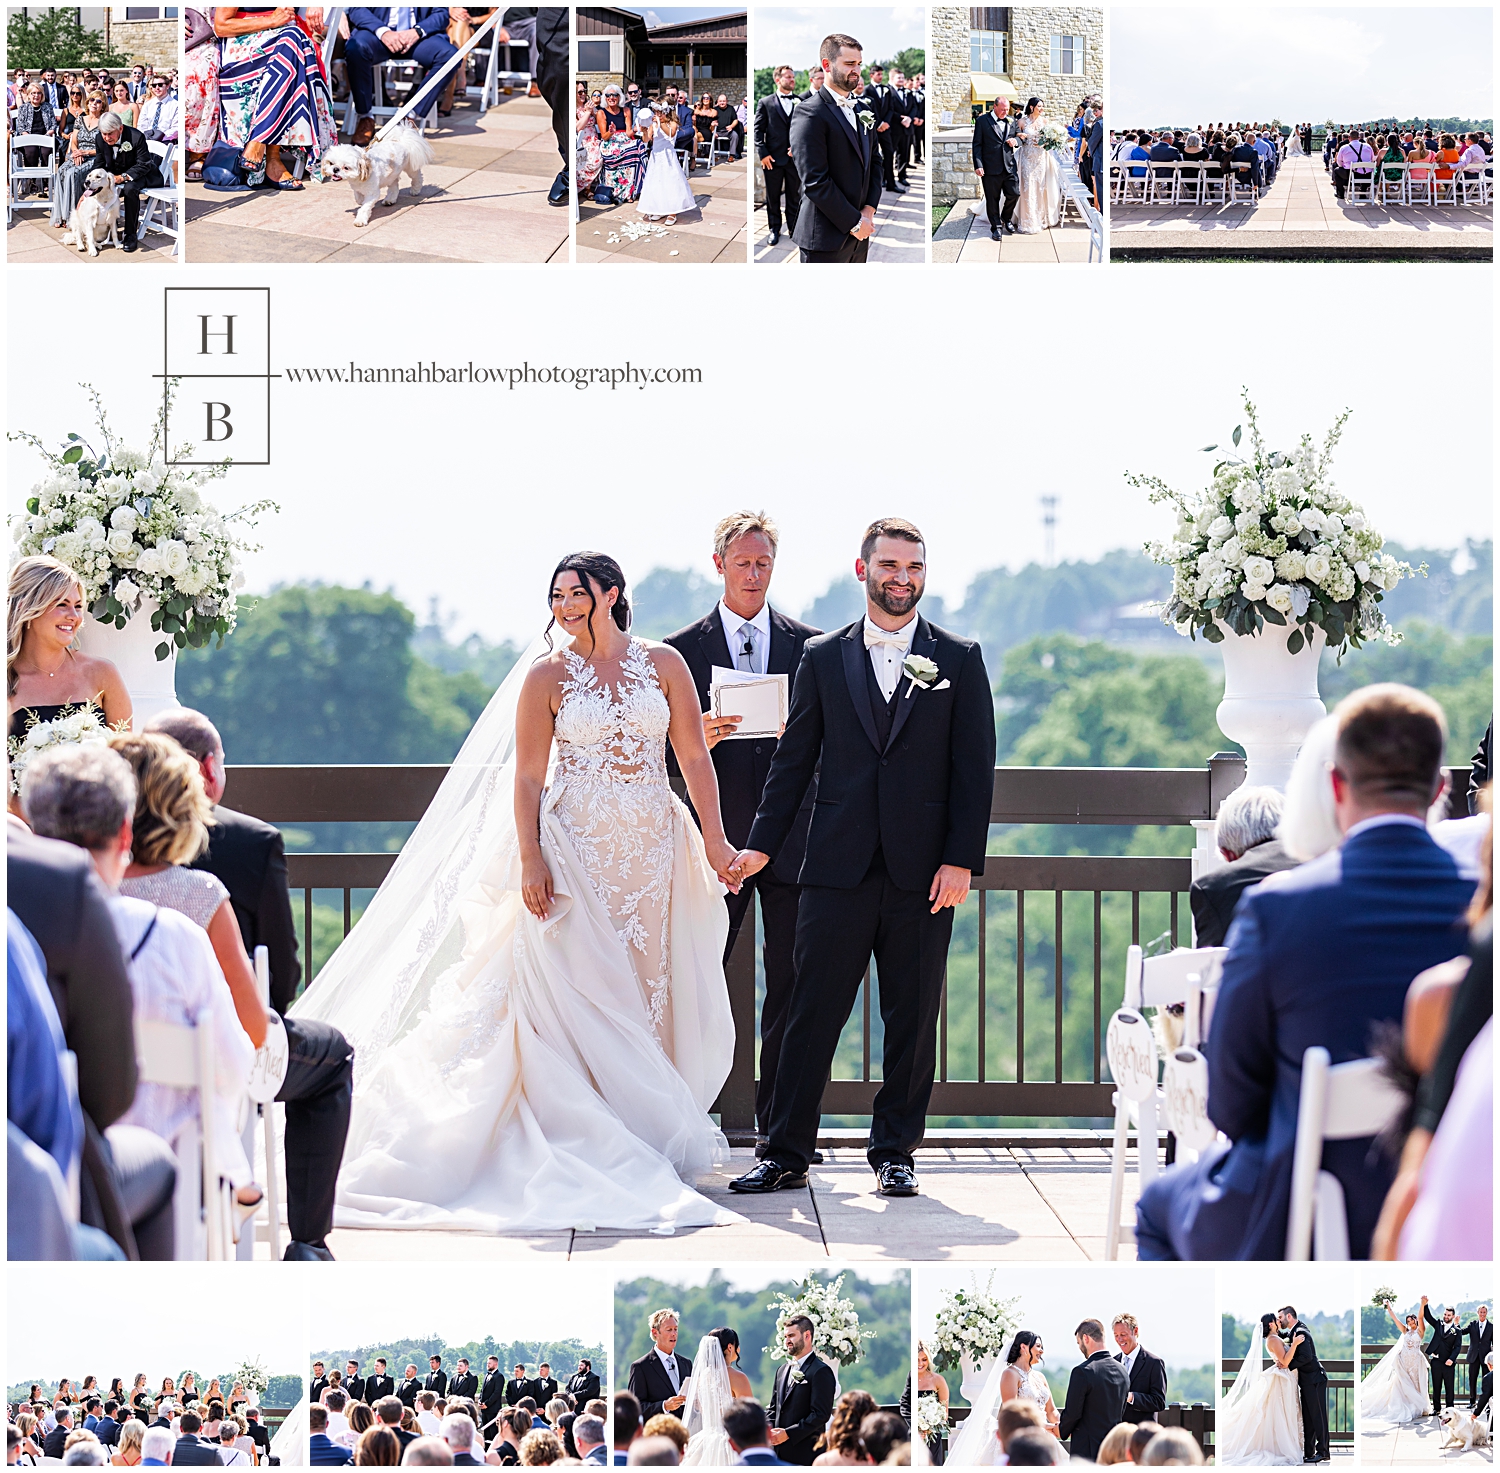 Collage of ceremony photos at outdoor wedding on Oglebay's West Spa Patio.